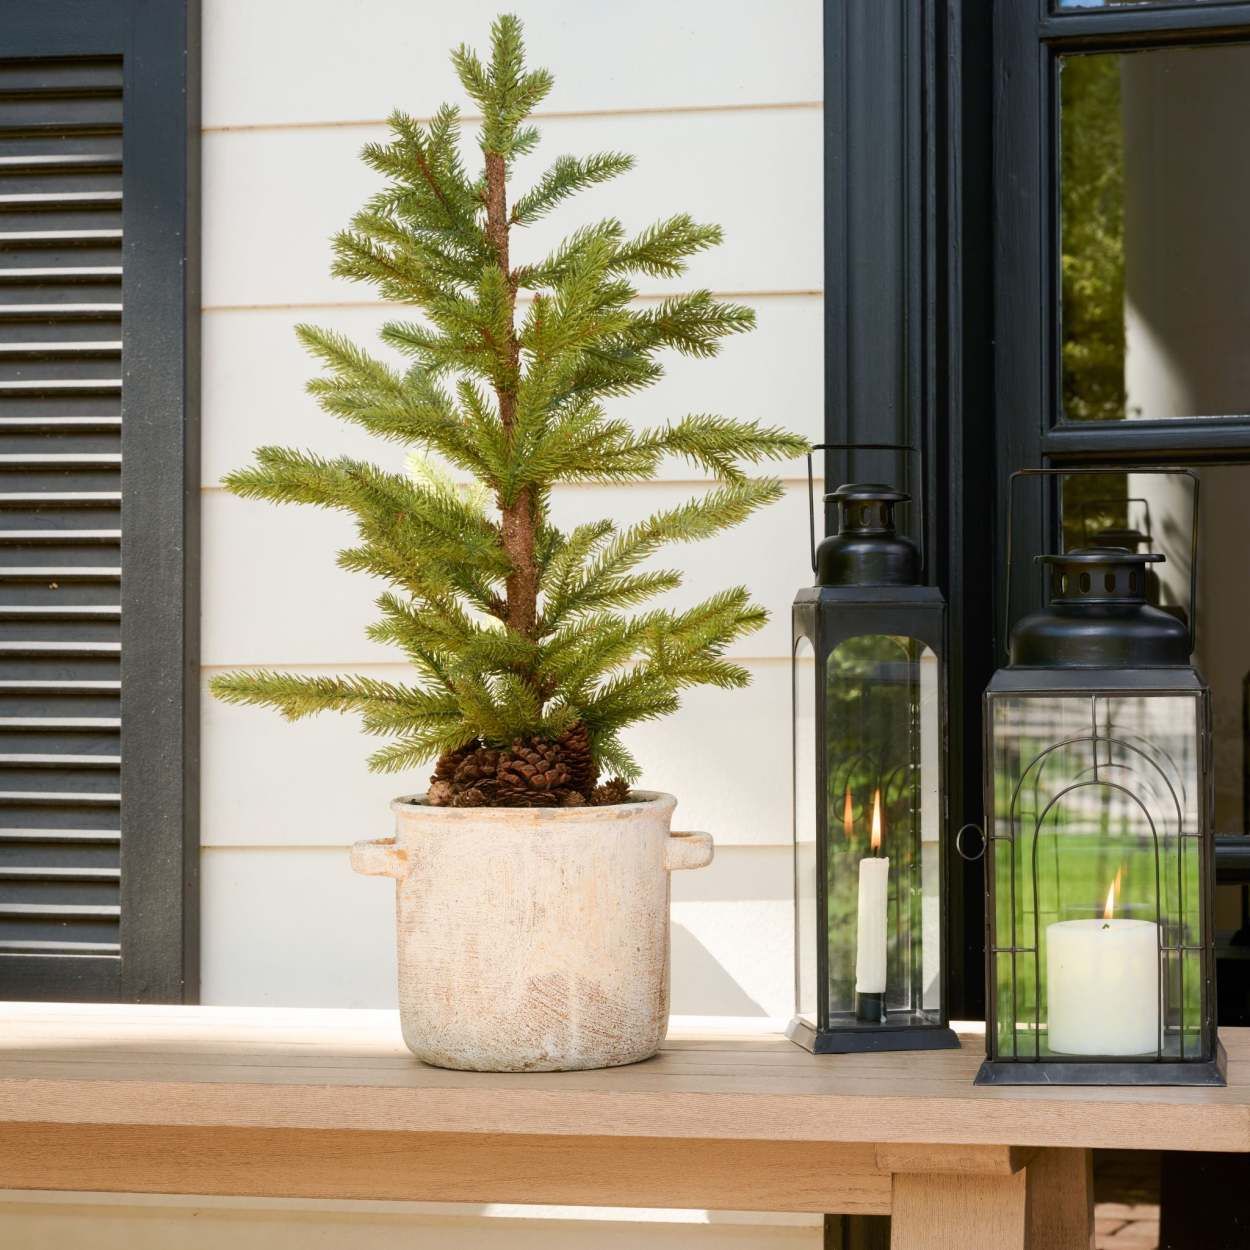 Potted Pine in Crock | Magnolia